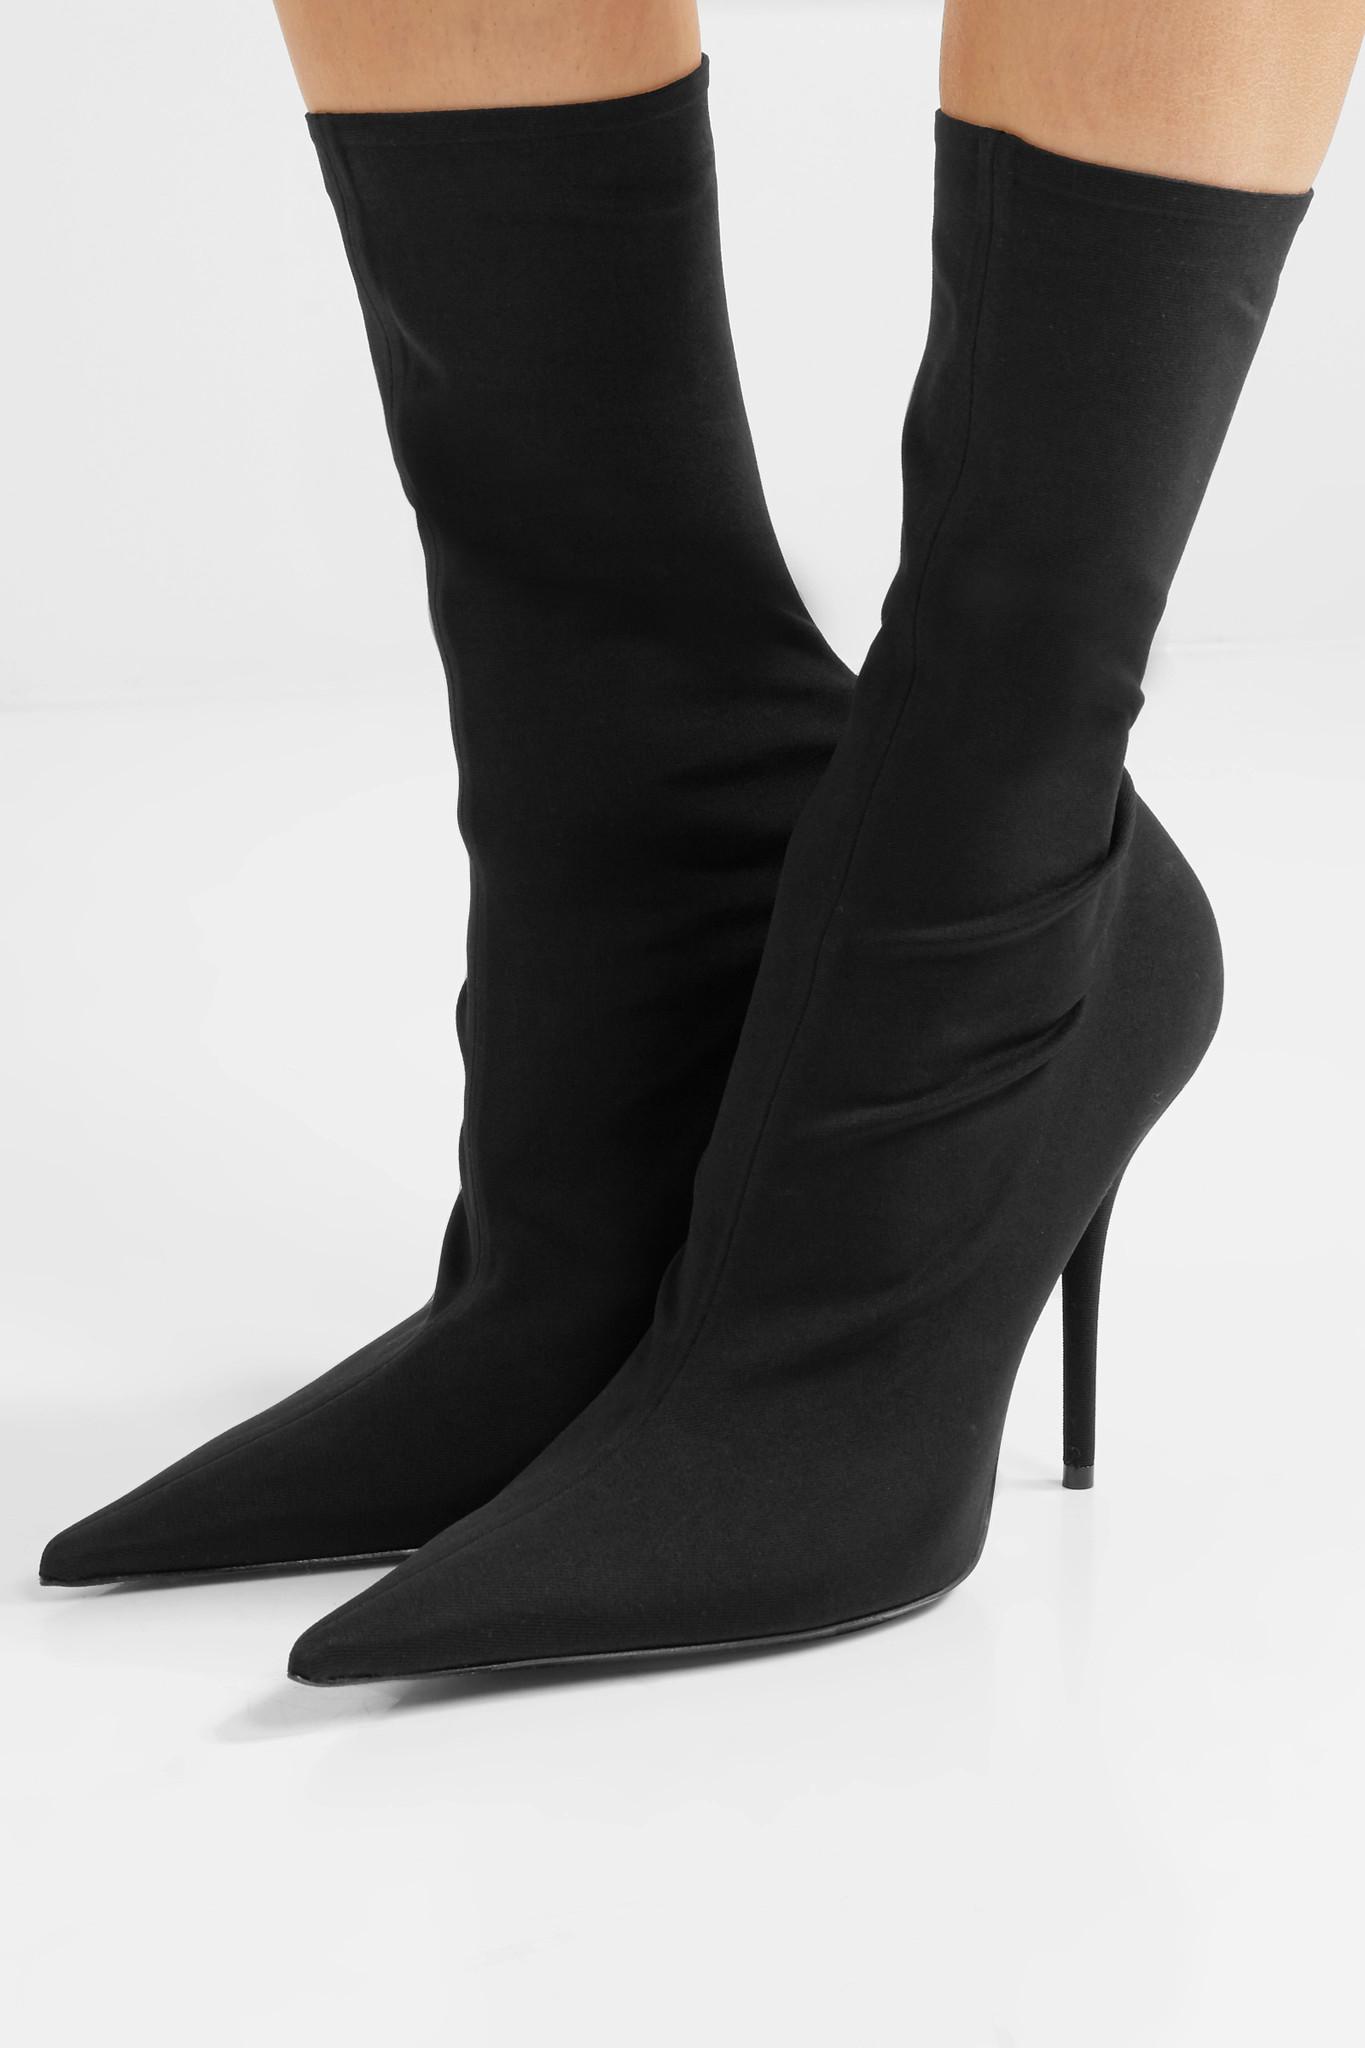 Balenciaga Satin Ankle Boots in Black - Lyst